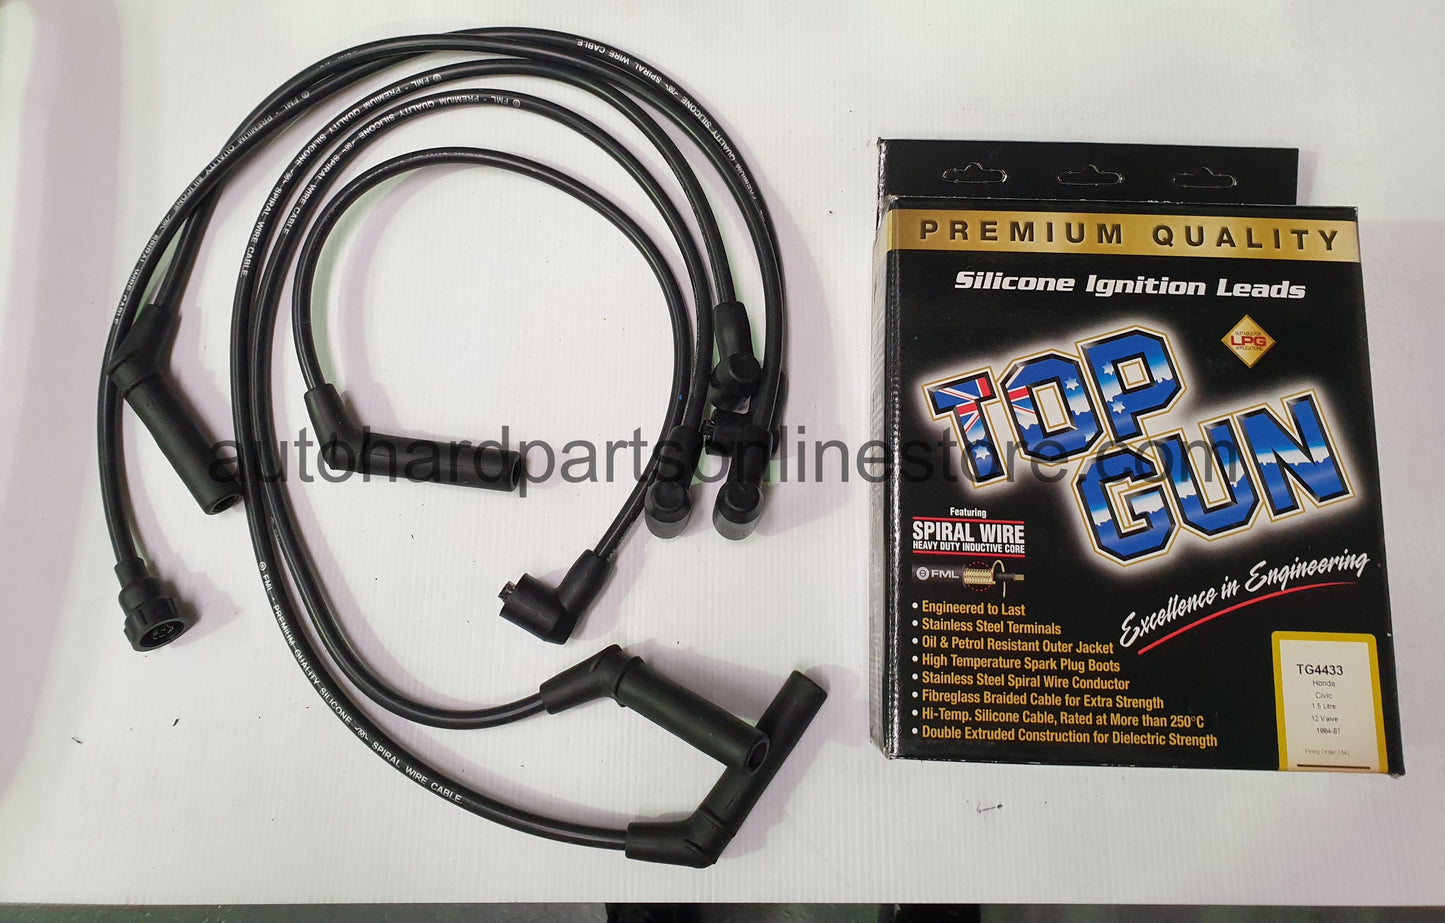 Top Gun ignition leads